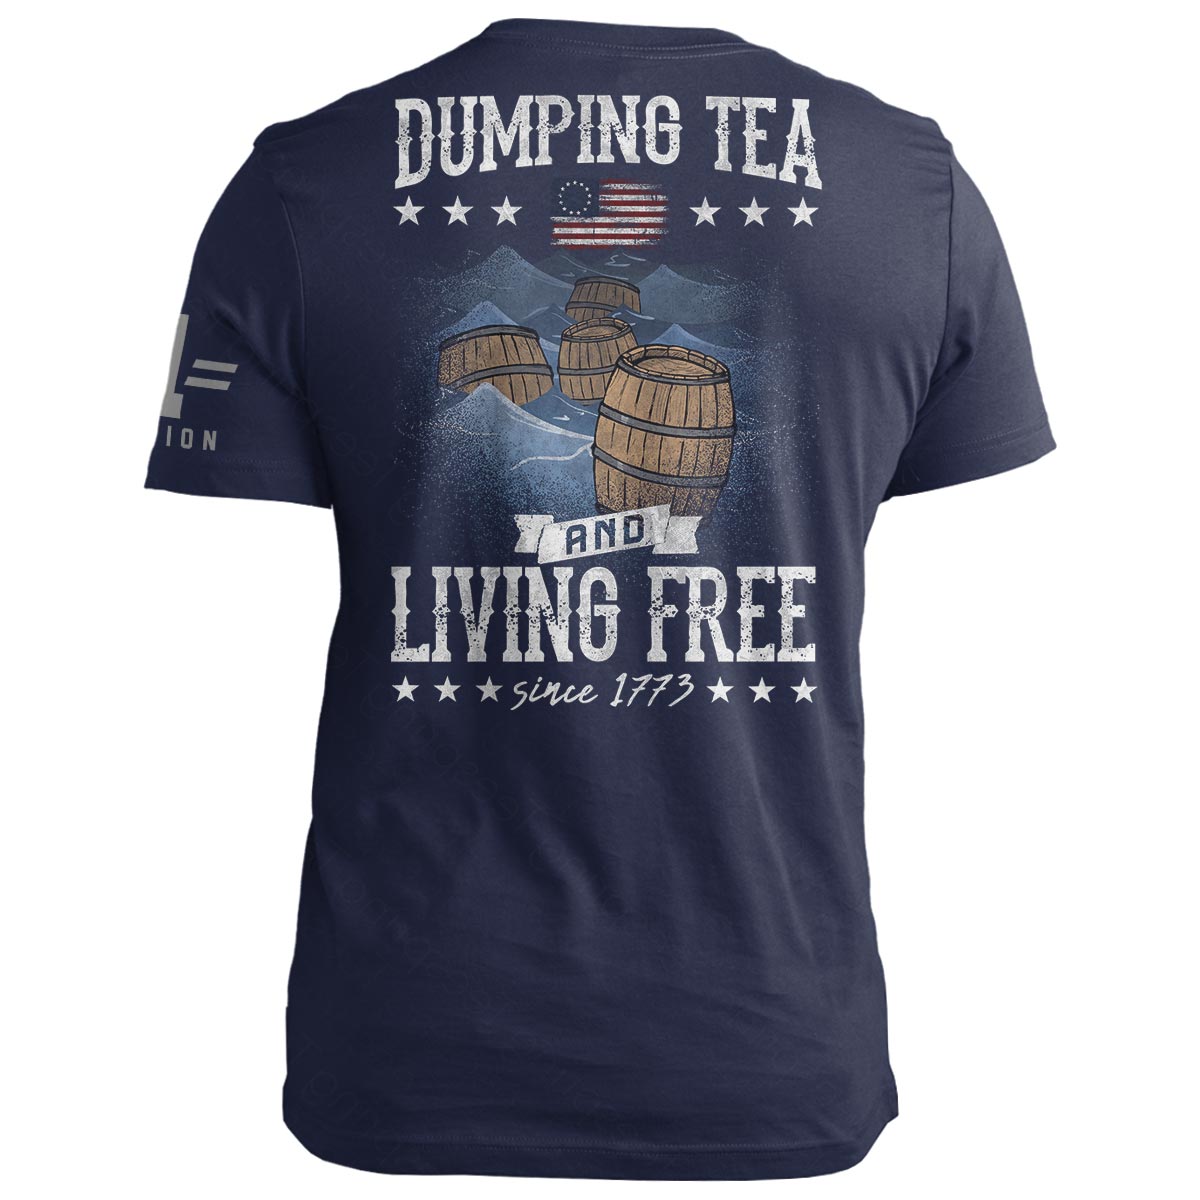 Dumping Tea and Living Free